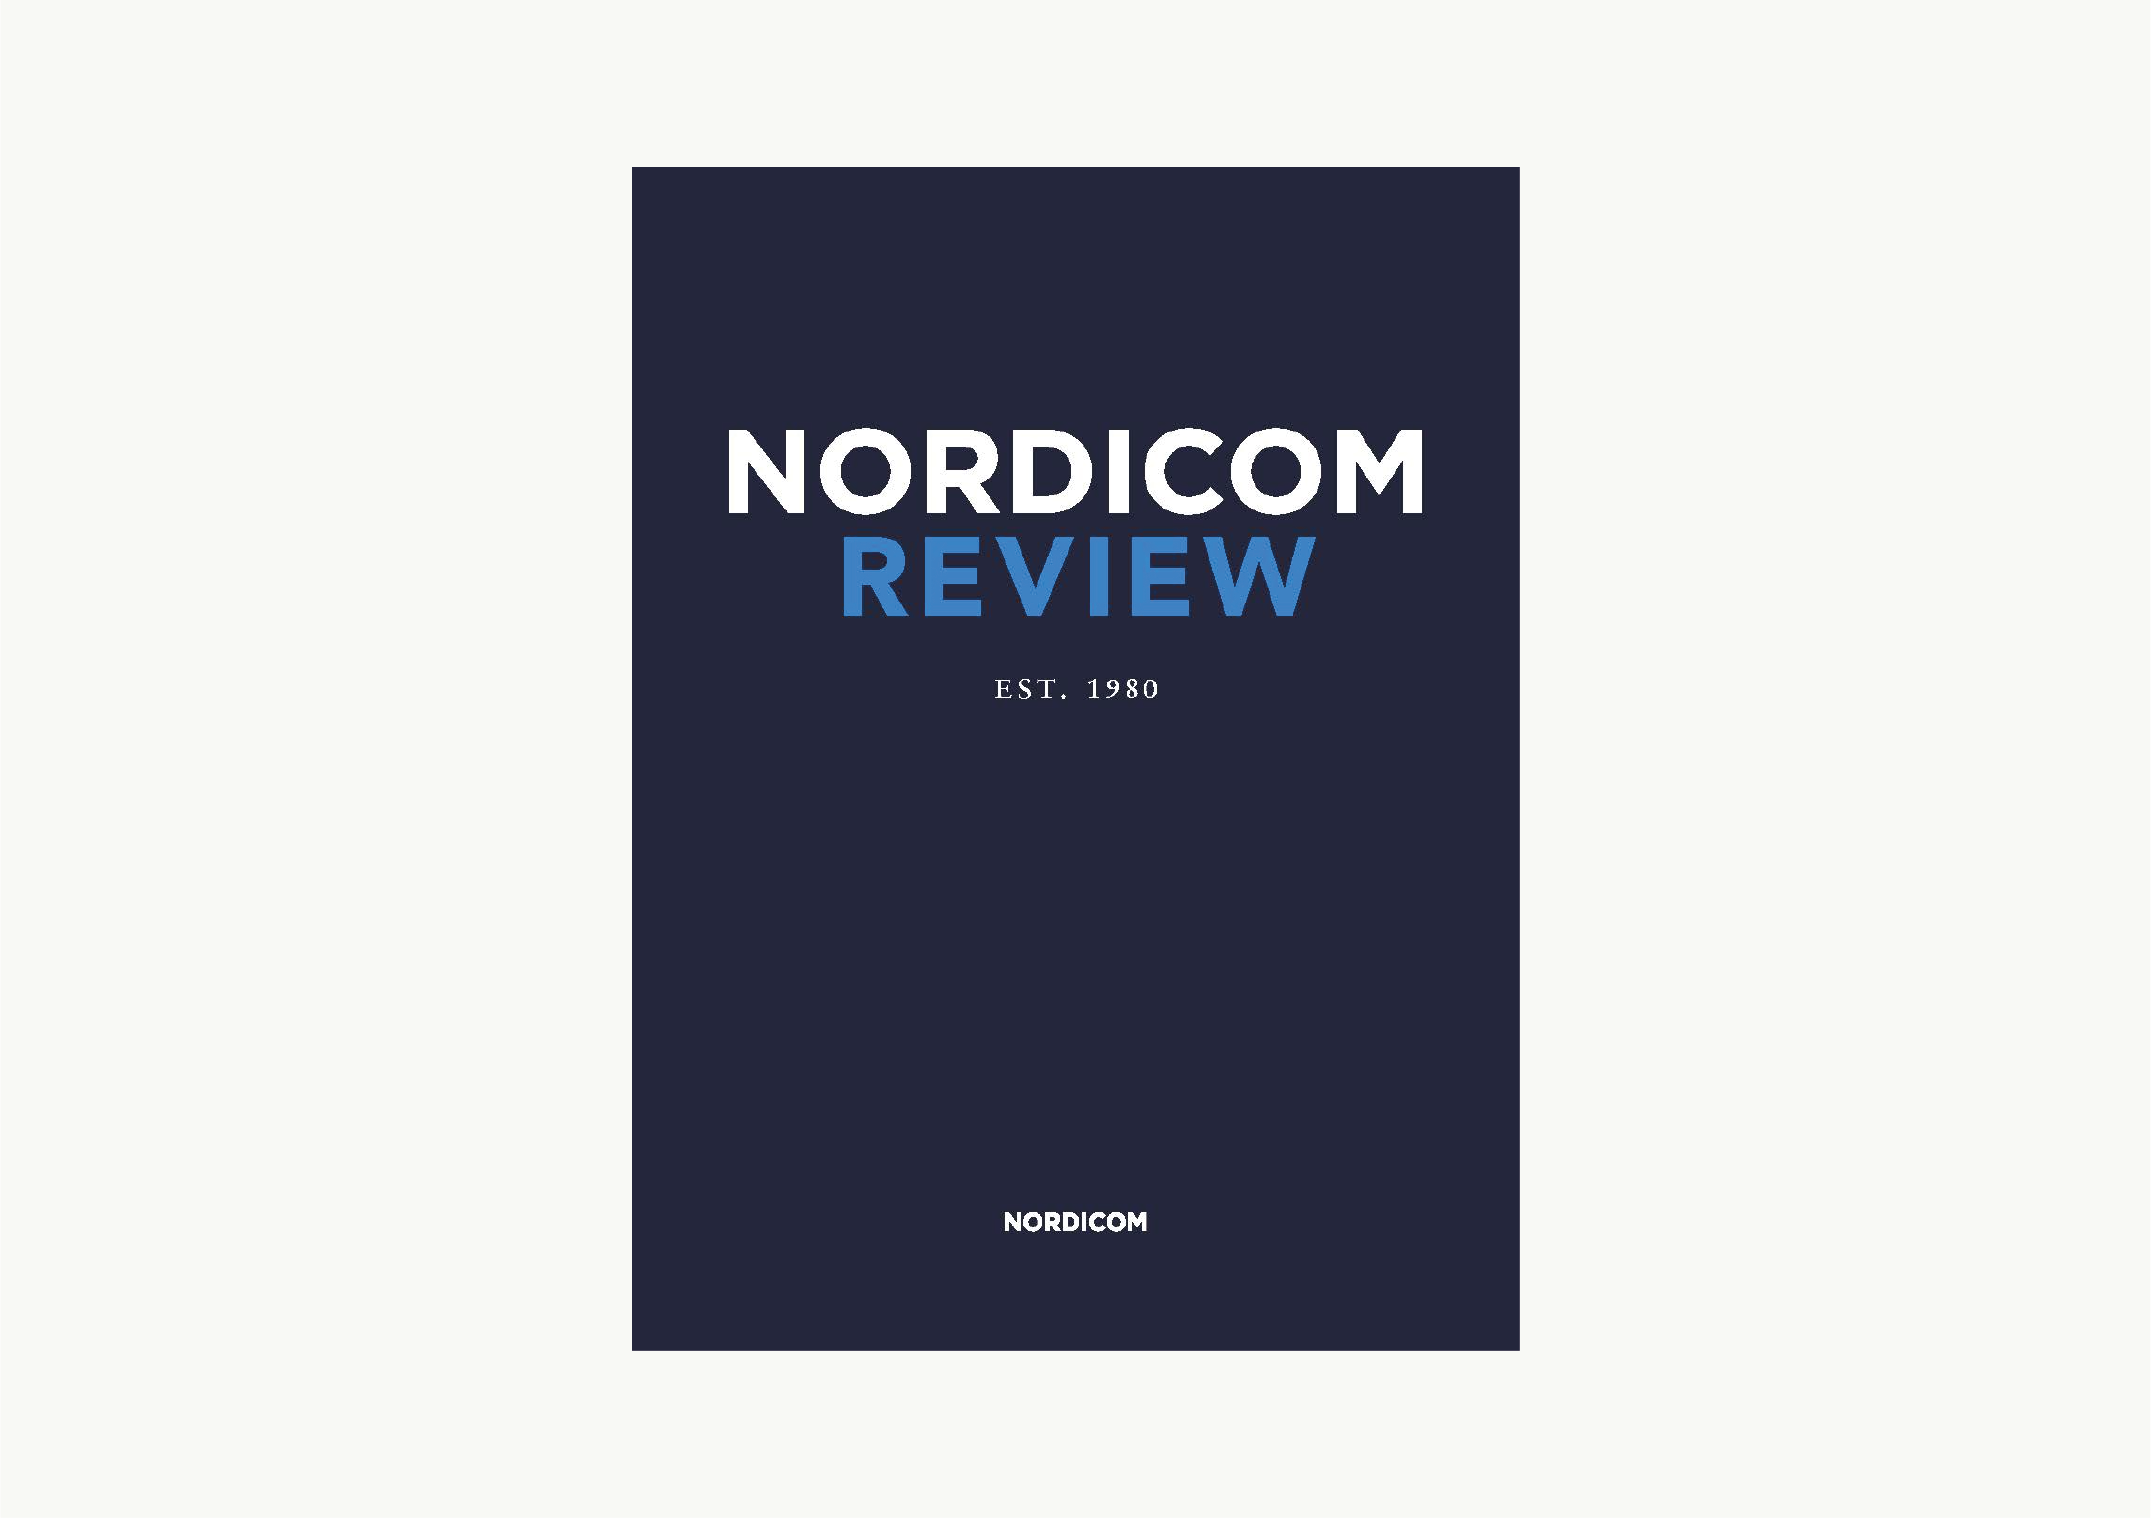 The cover of Nordicom Review.